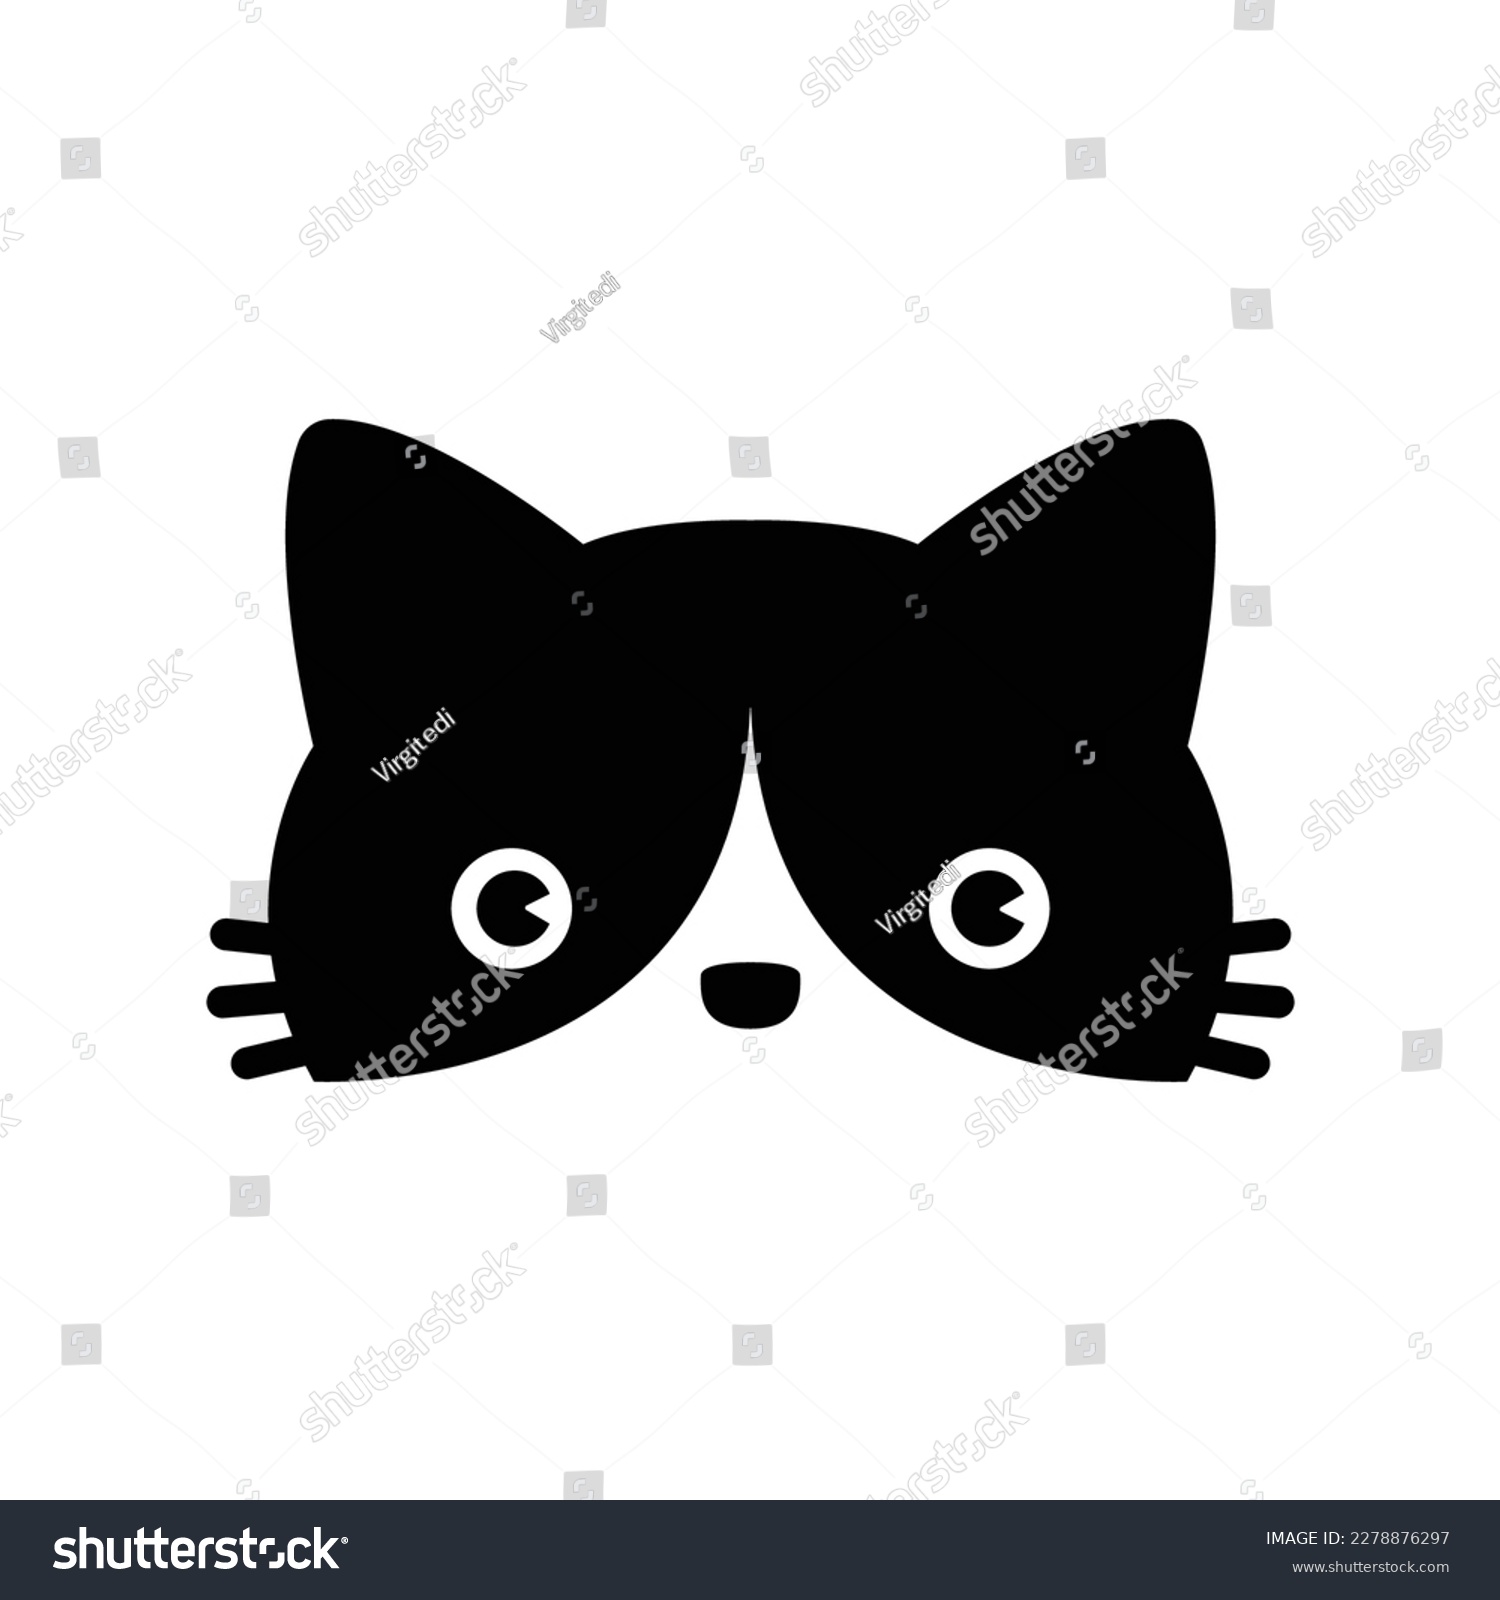 SVG of Cat face illustration drawing icon svg